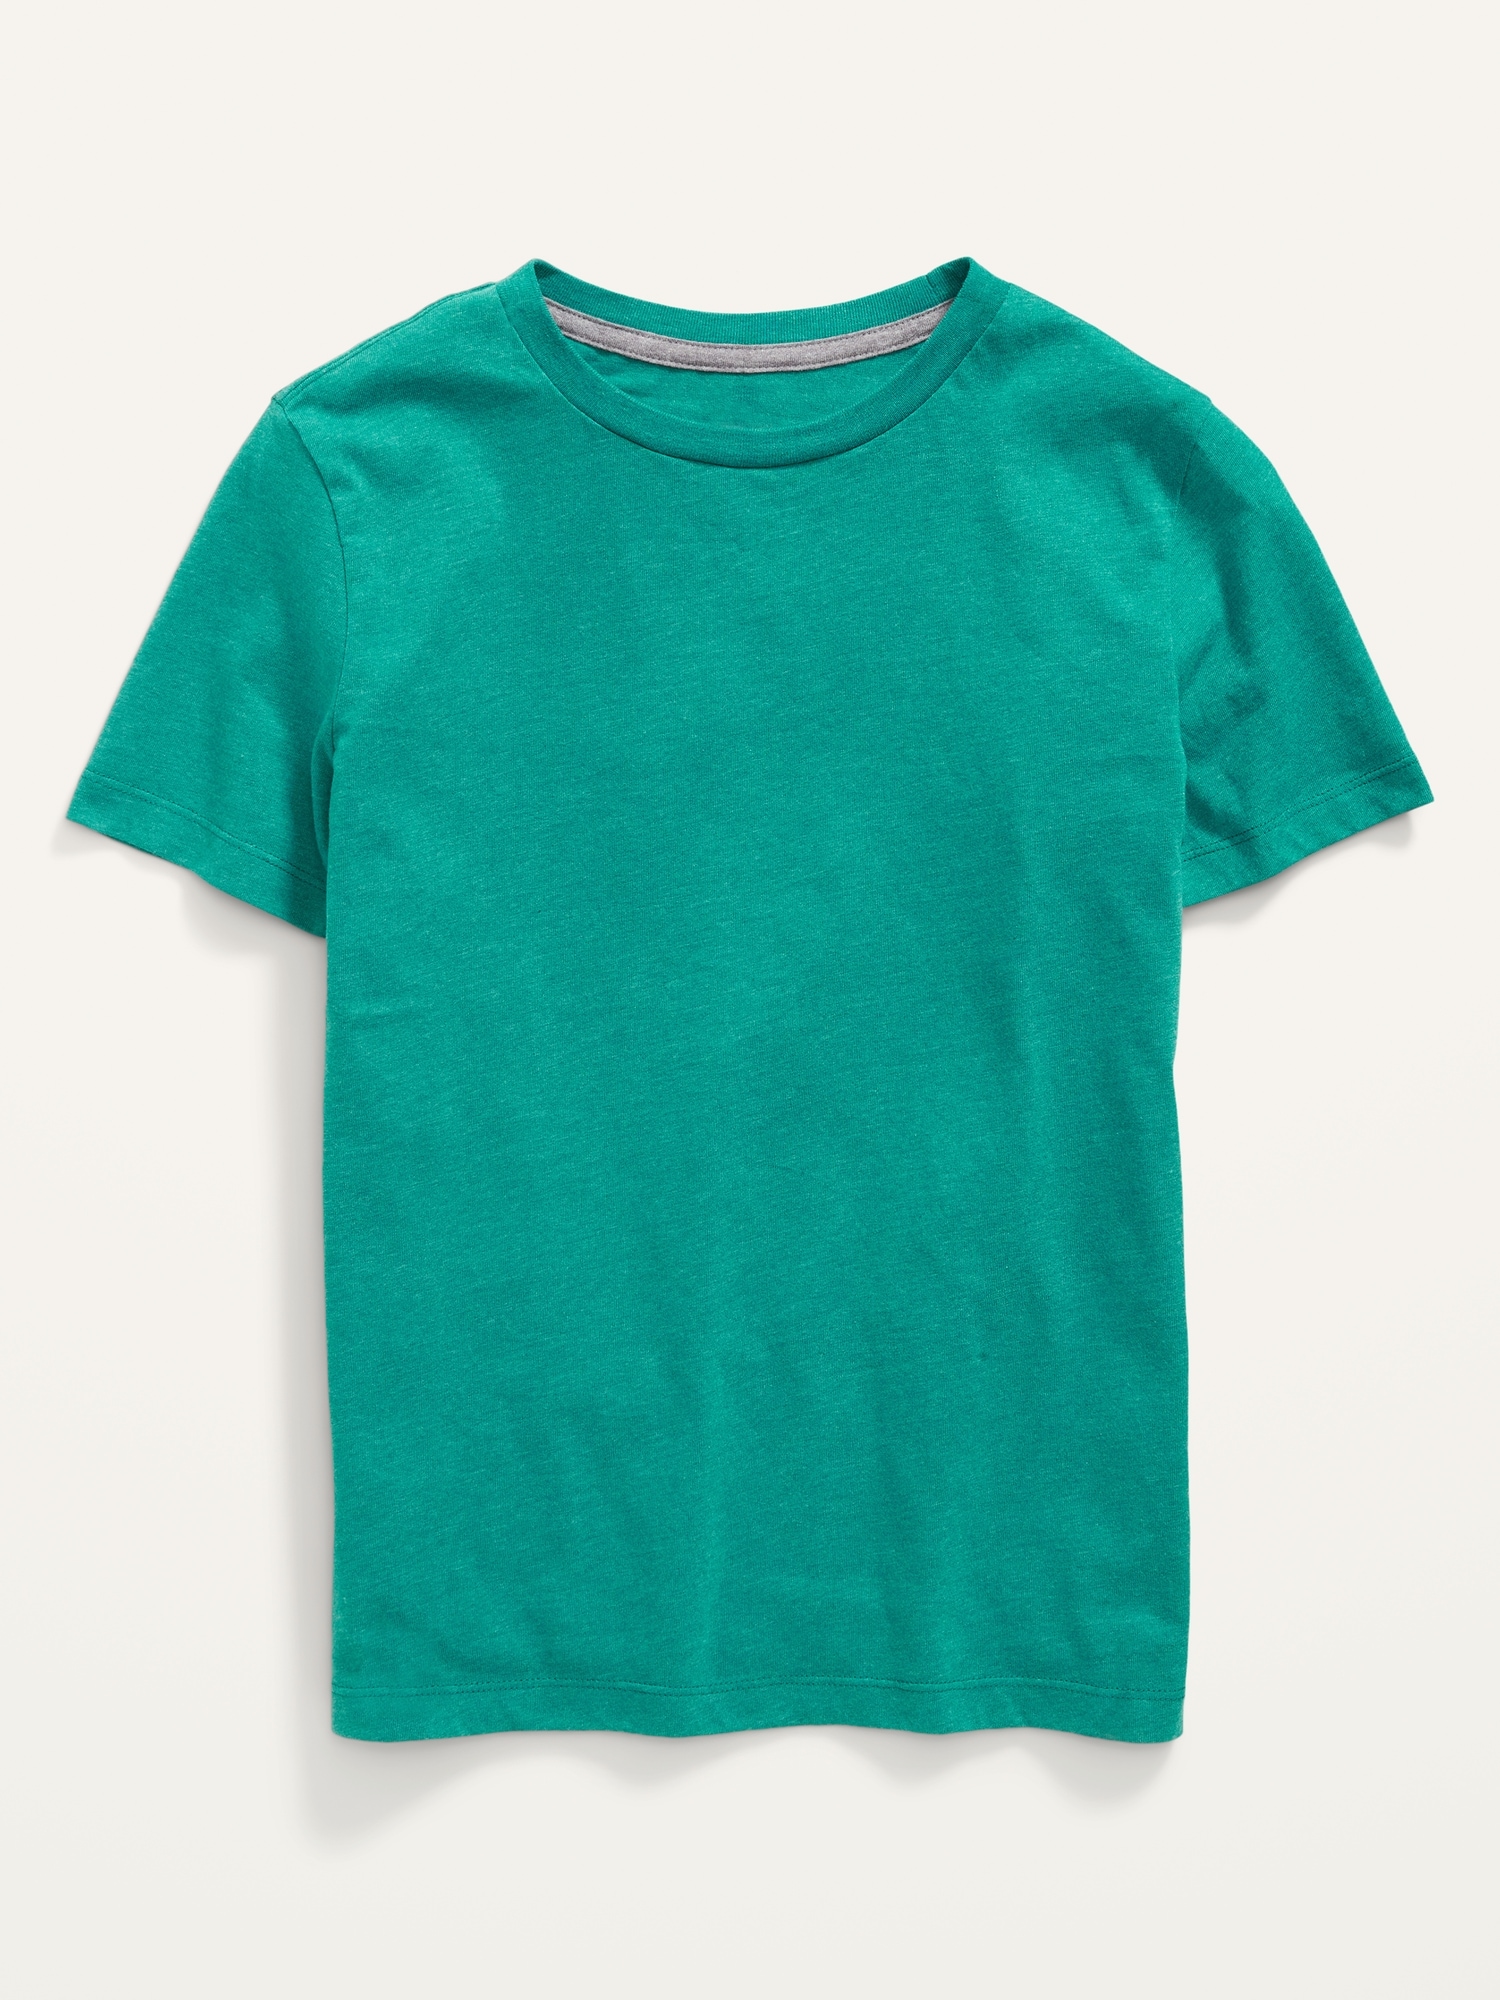 Softest Short-Sleeve Solid T-Shirt for Boys | Old Navy